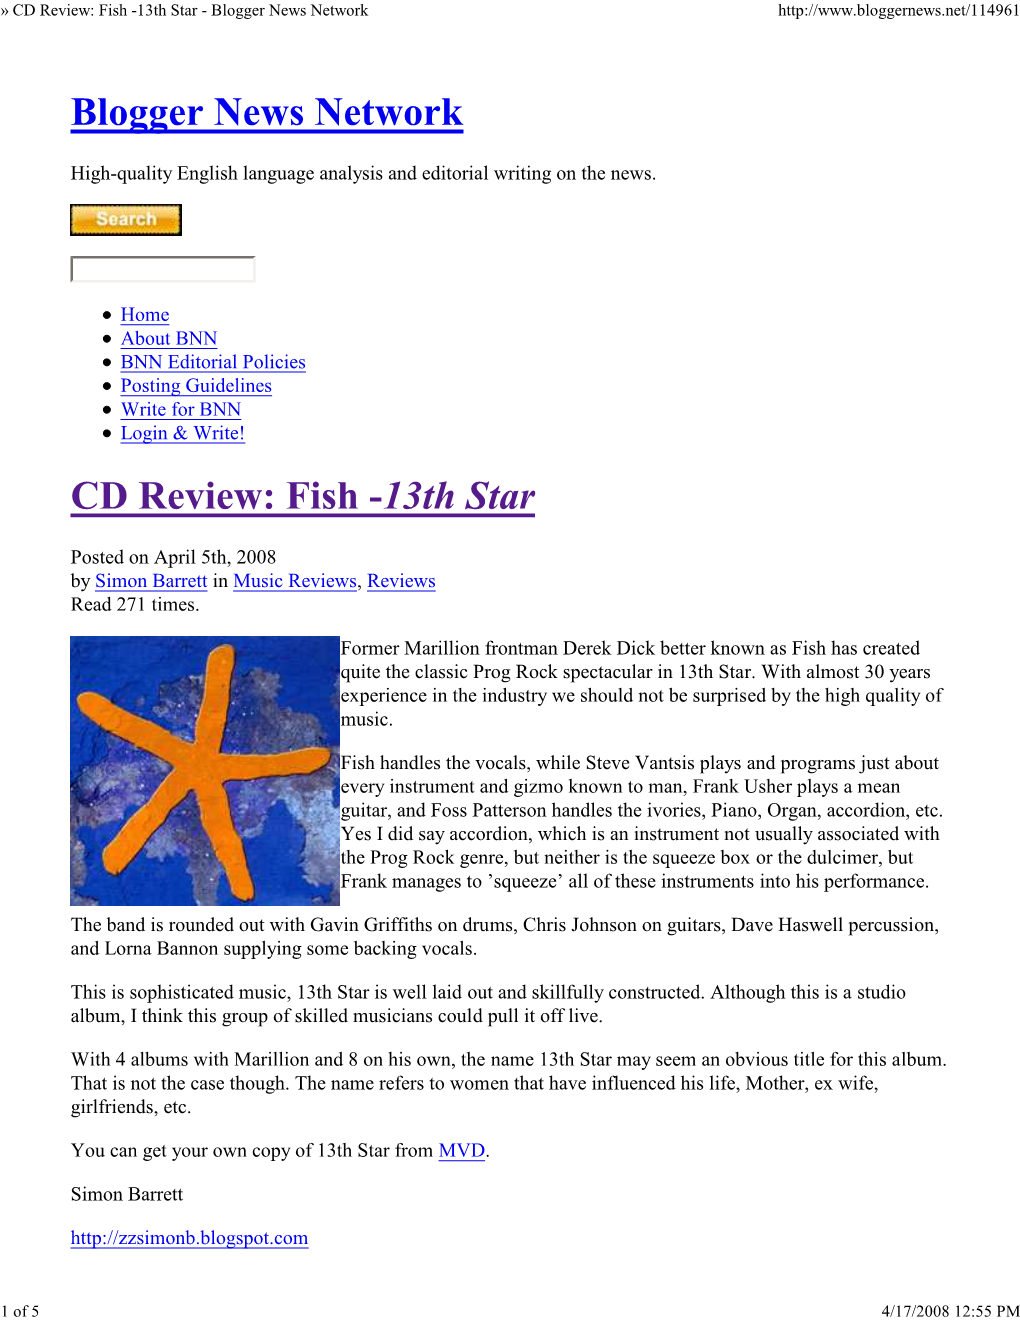 CD Review: Fish -13Th Star - Blogger News Network